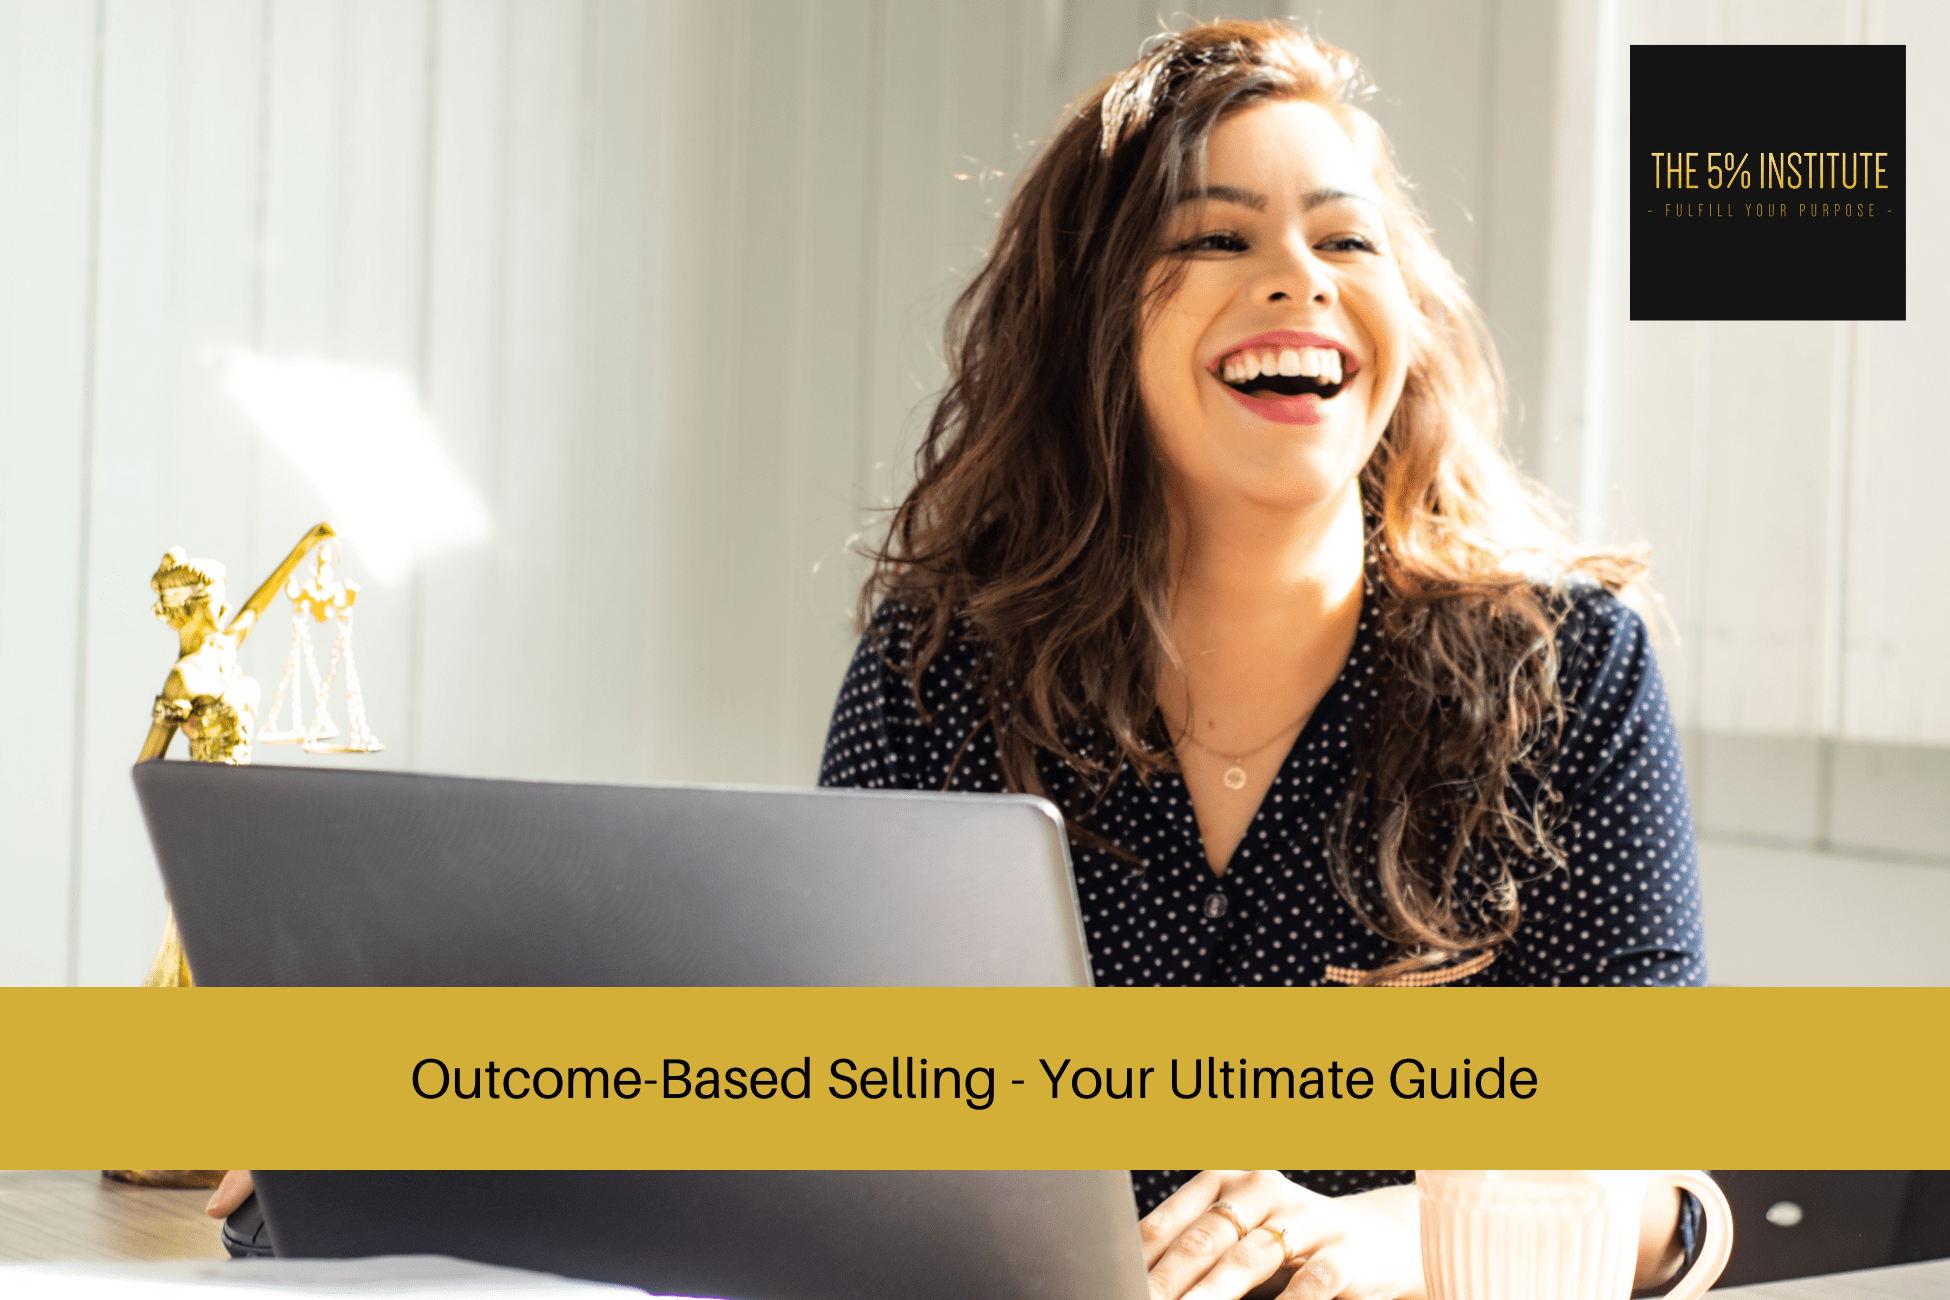 Outcome-Based Selling - Your Ultimate Guide